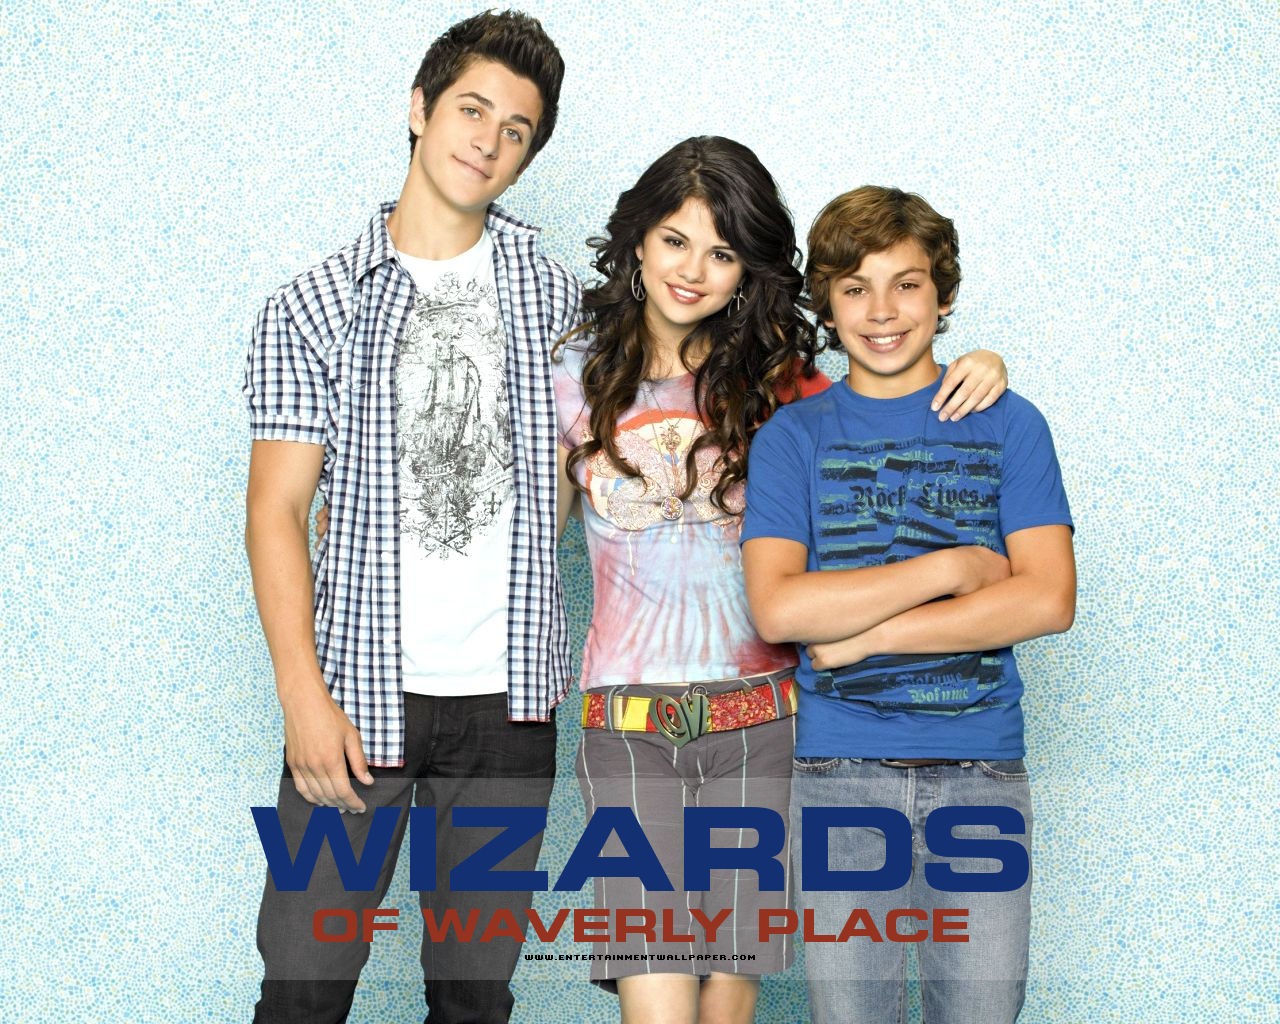 Wizards of Waverly Place 少年魔法師 #8 - 1280x1024